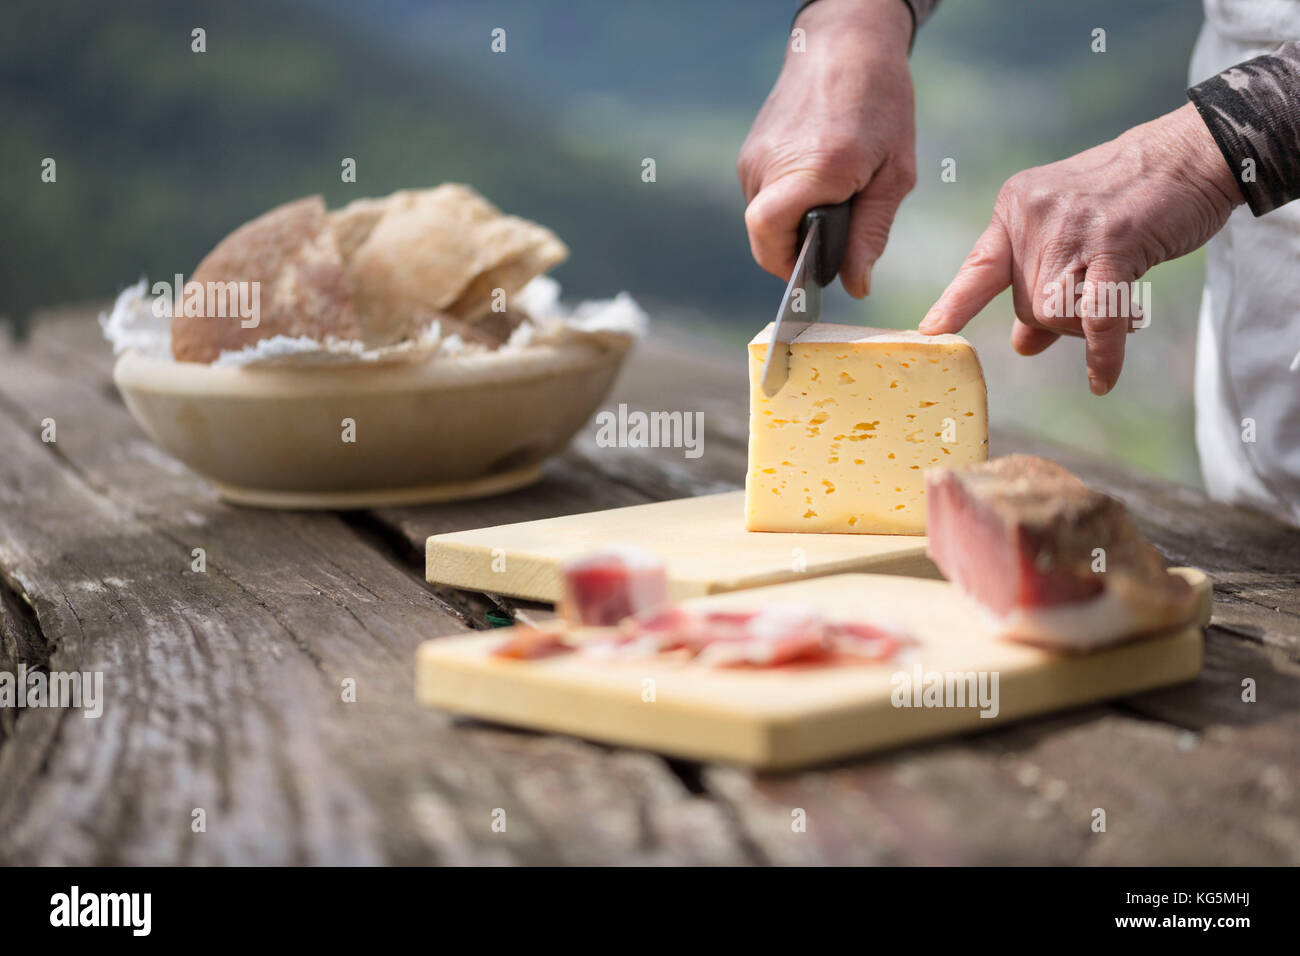 a chef is cutting a piece of cheese, Bolzano province, South Tyrol, Trentino Alto Adige, Italy, Stock Photo